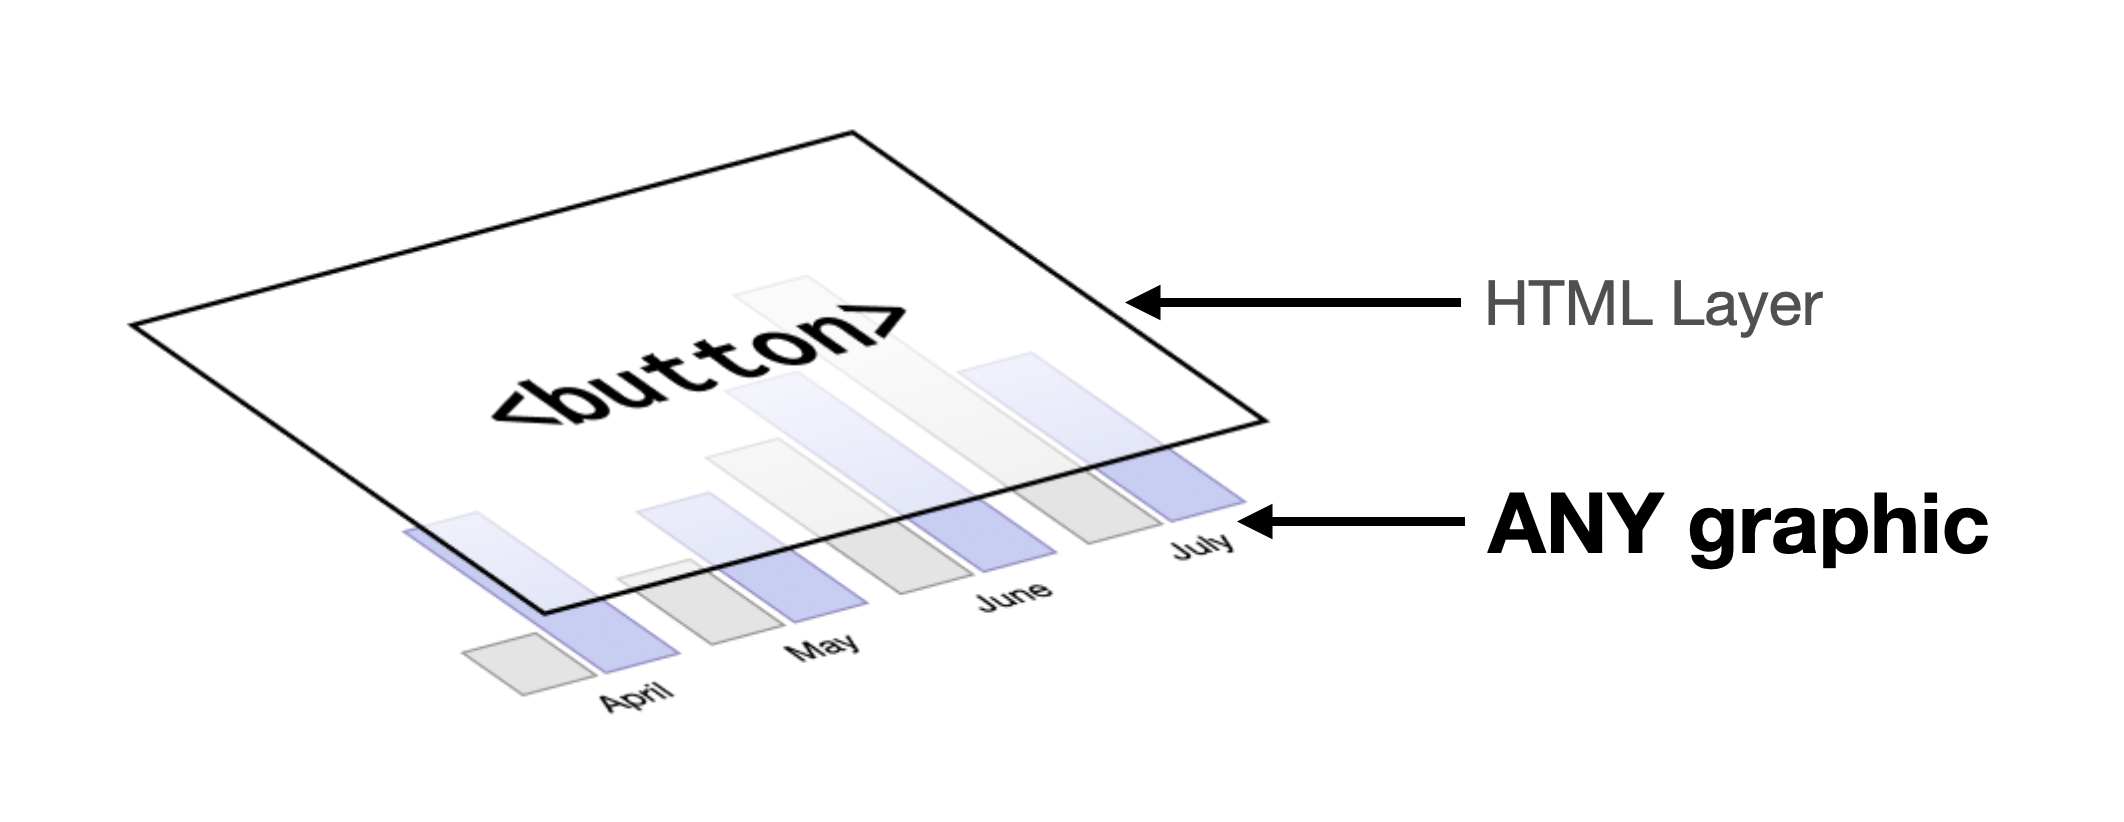 Diagram. A layer is shown on top of a bar chart. The layer is labeled with "HTML Layer" and the bar chart is labeled with "ANY graphic."